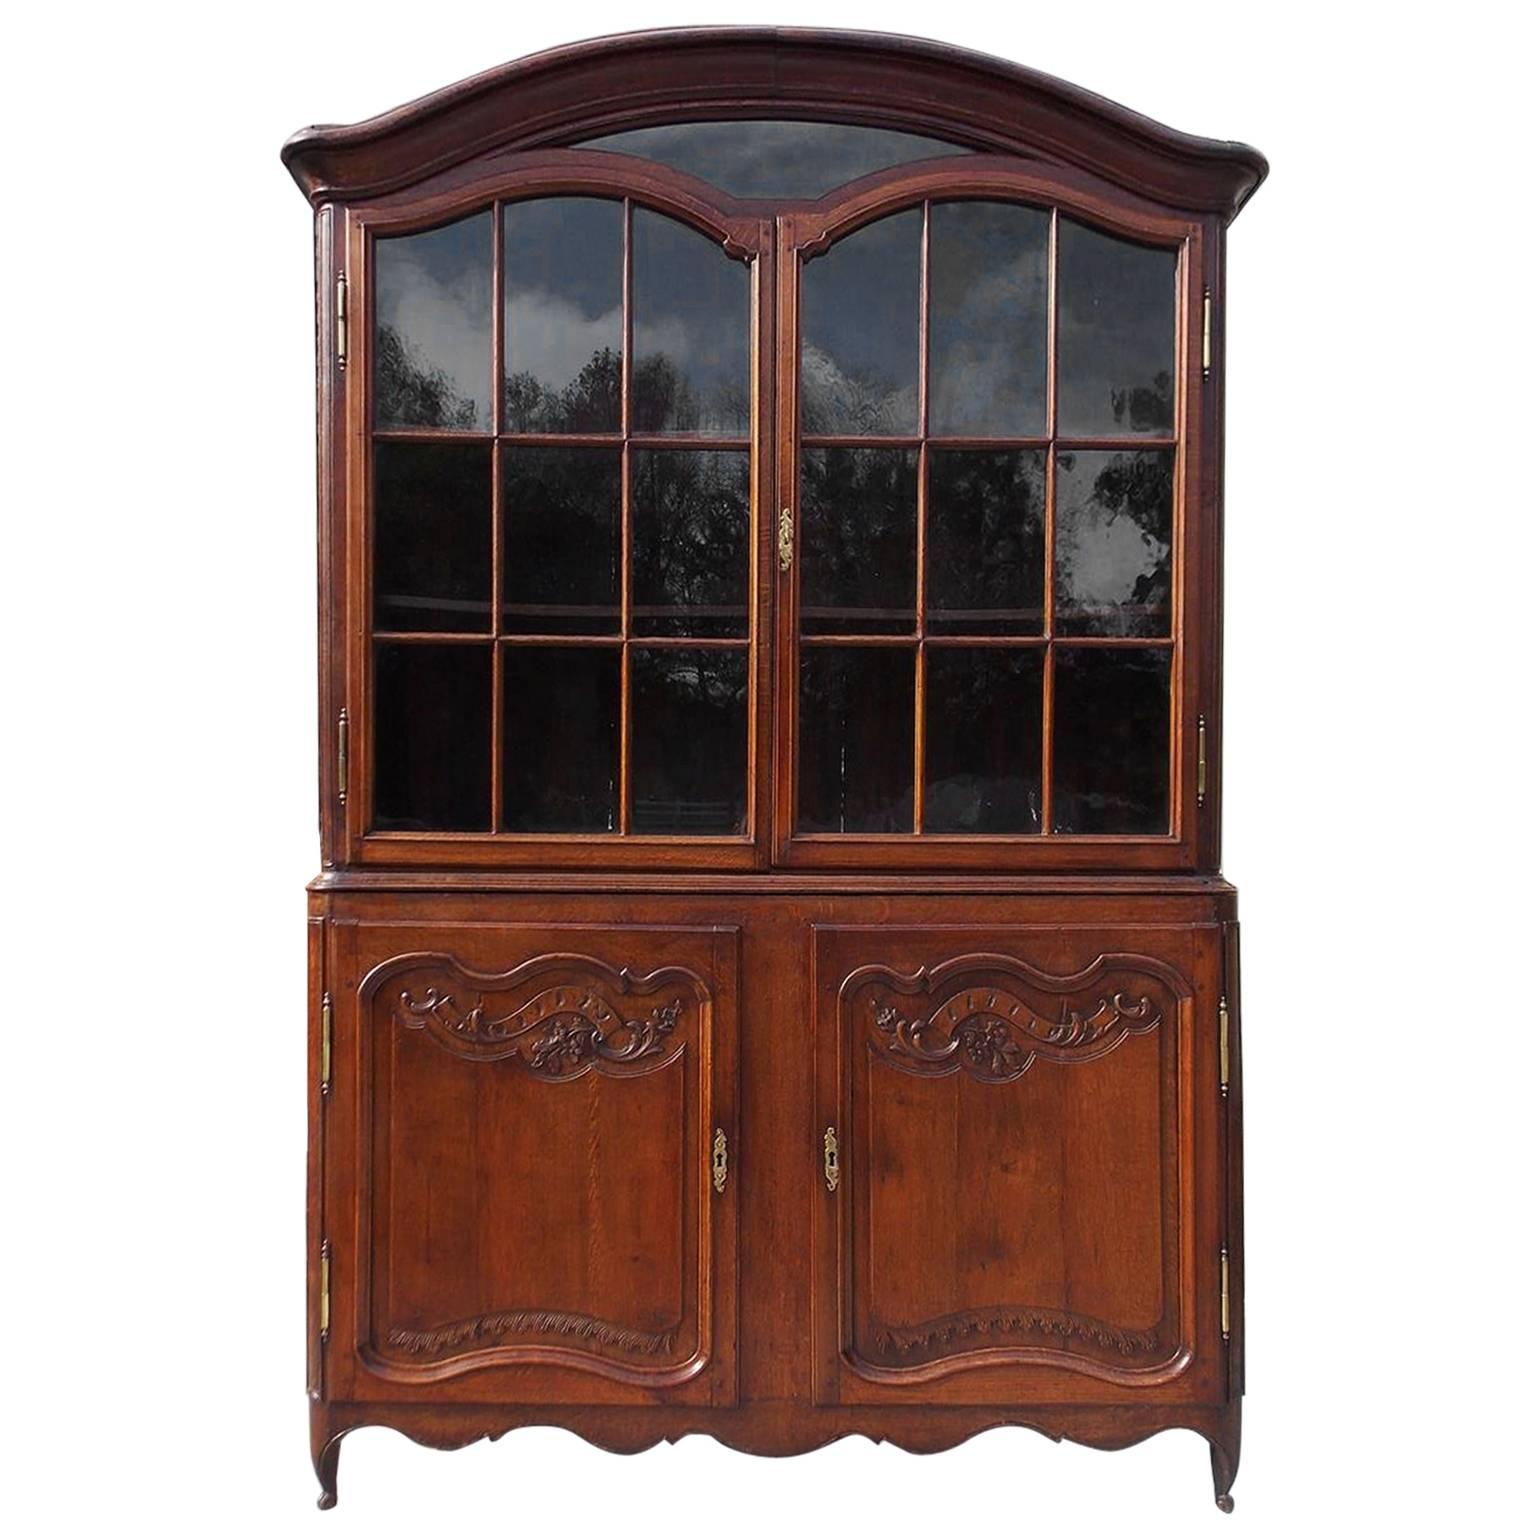 French Provincial Walnut Flanking Glass & Cabinet Arched Dome Cupboard, C. 1780